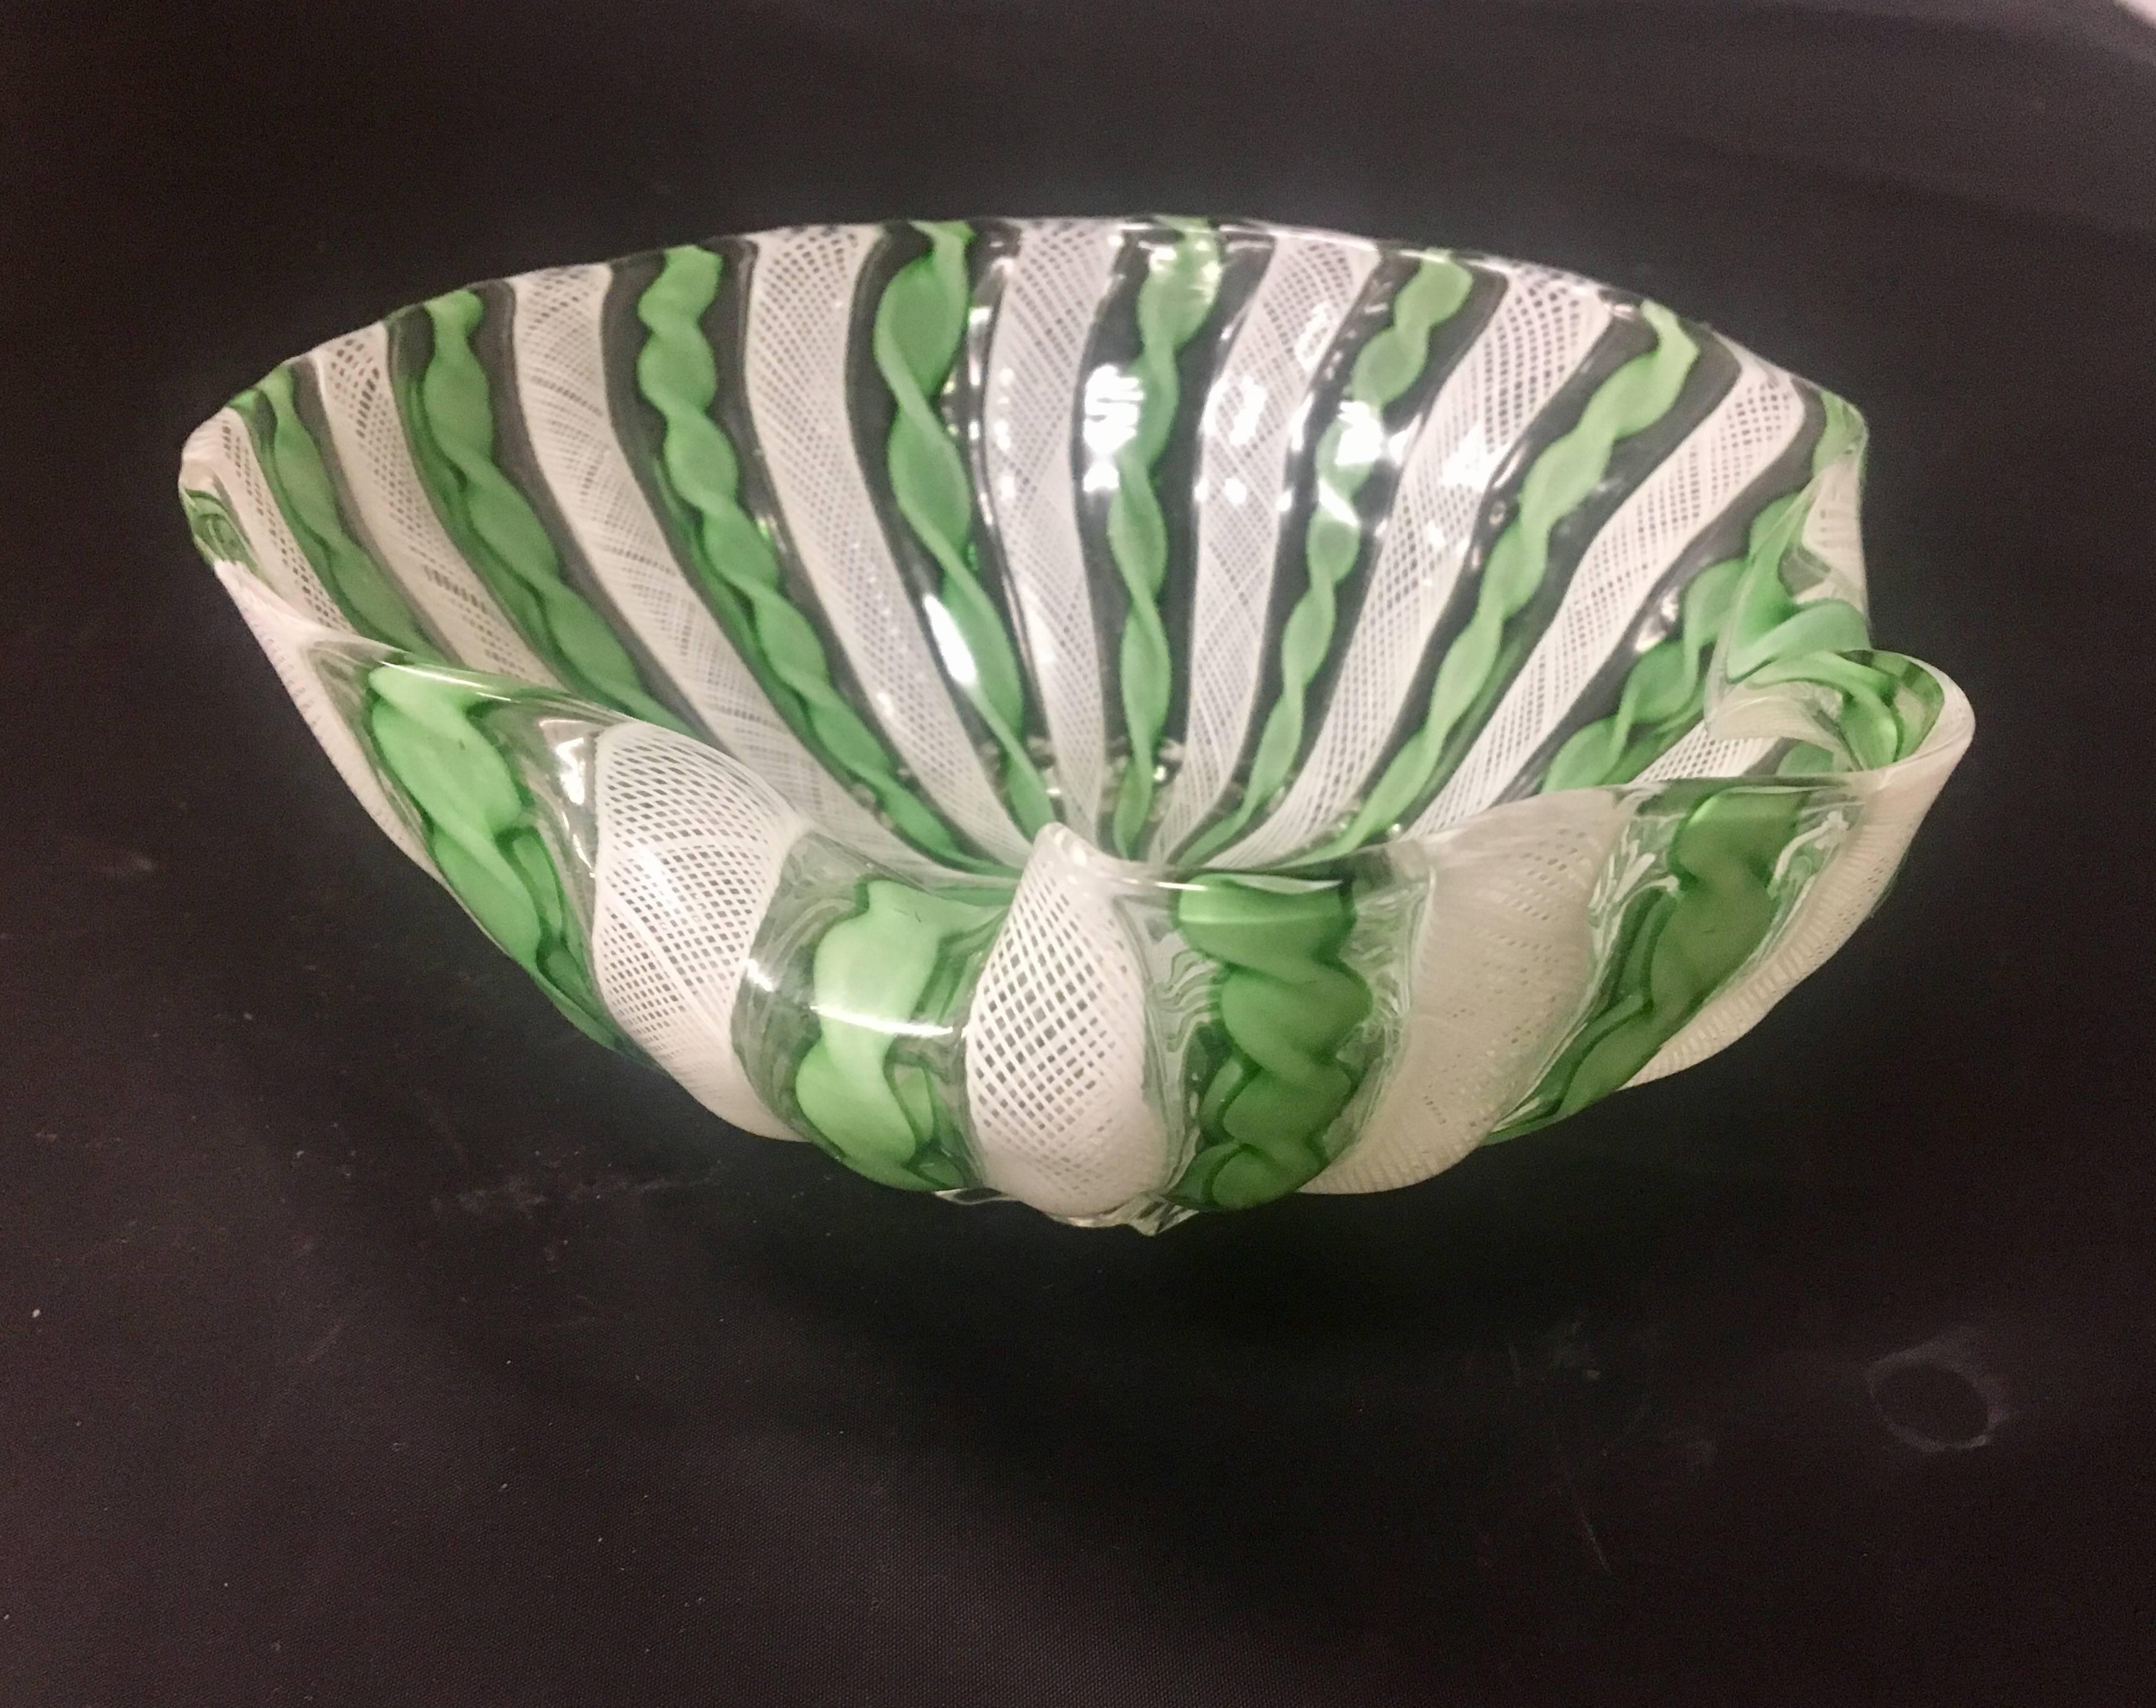 Beautiful Murano Venitian glass bowl with footed base. Excellent condition, no chips or cracks; retains its original label. Green, clear and white color combination.